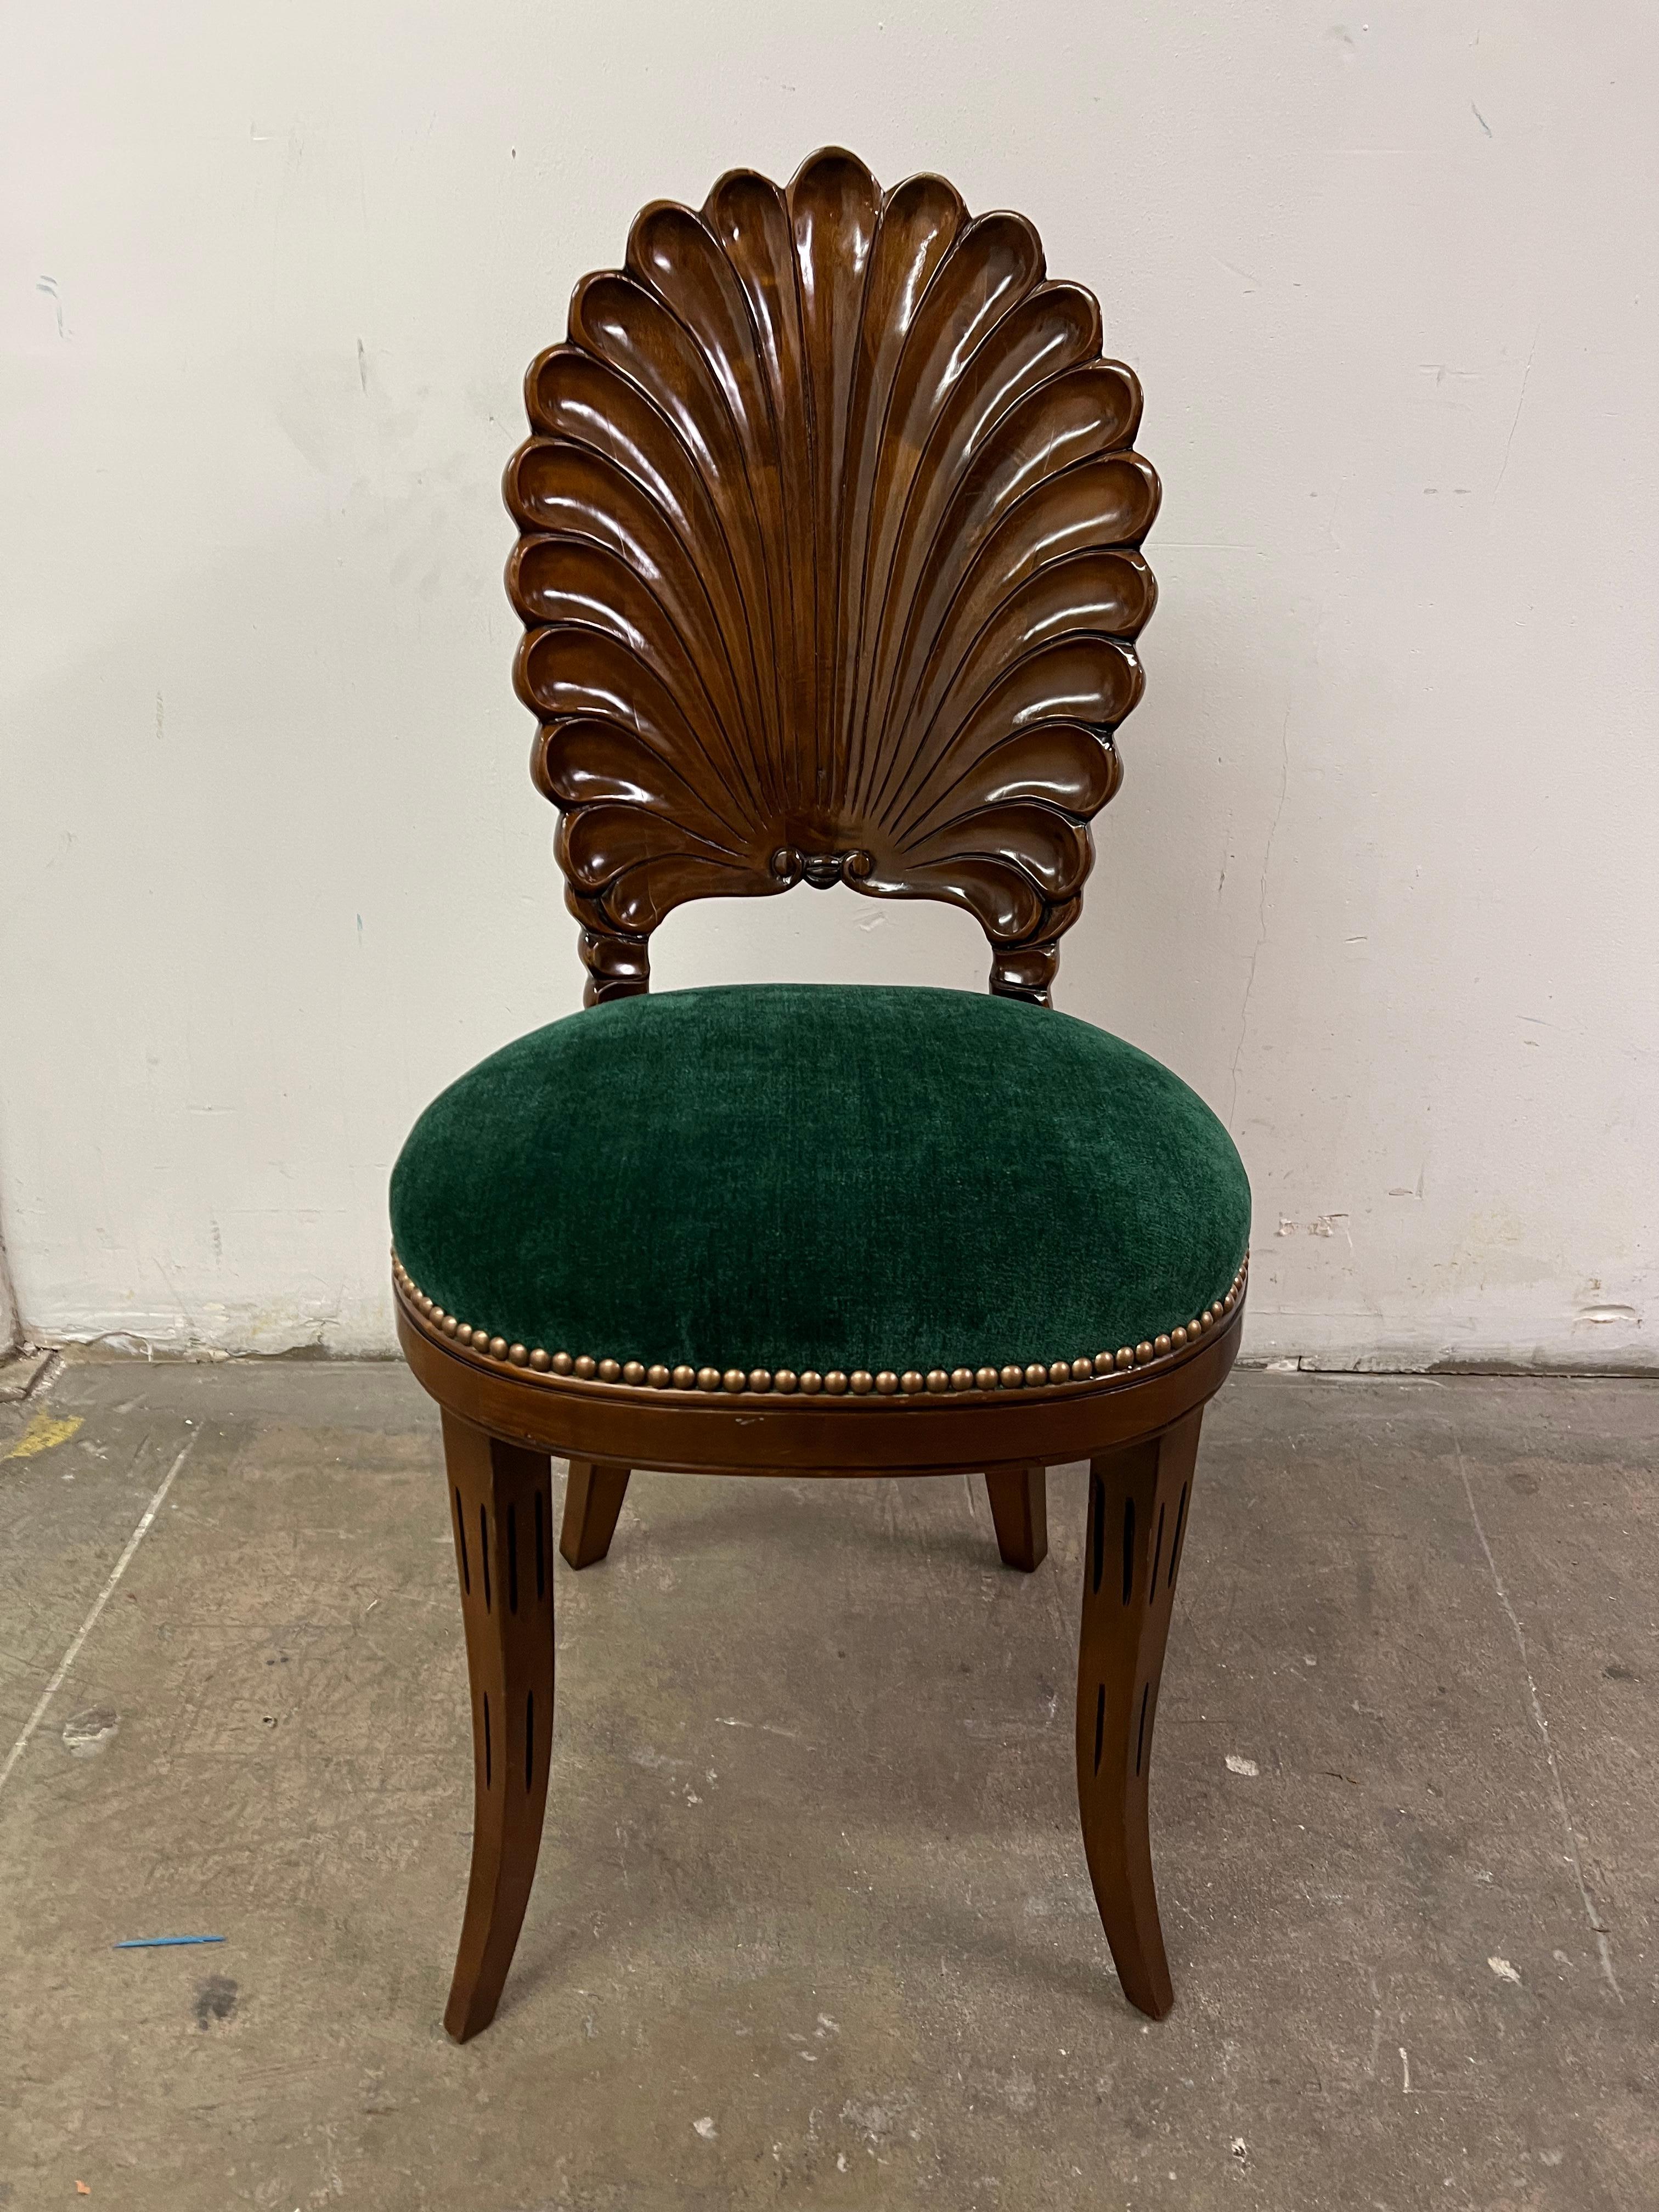 20th Century Walnut Grotto Shell Side Chair Upholstered in Green Mohair